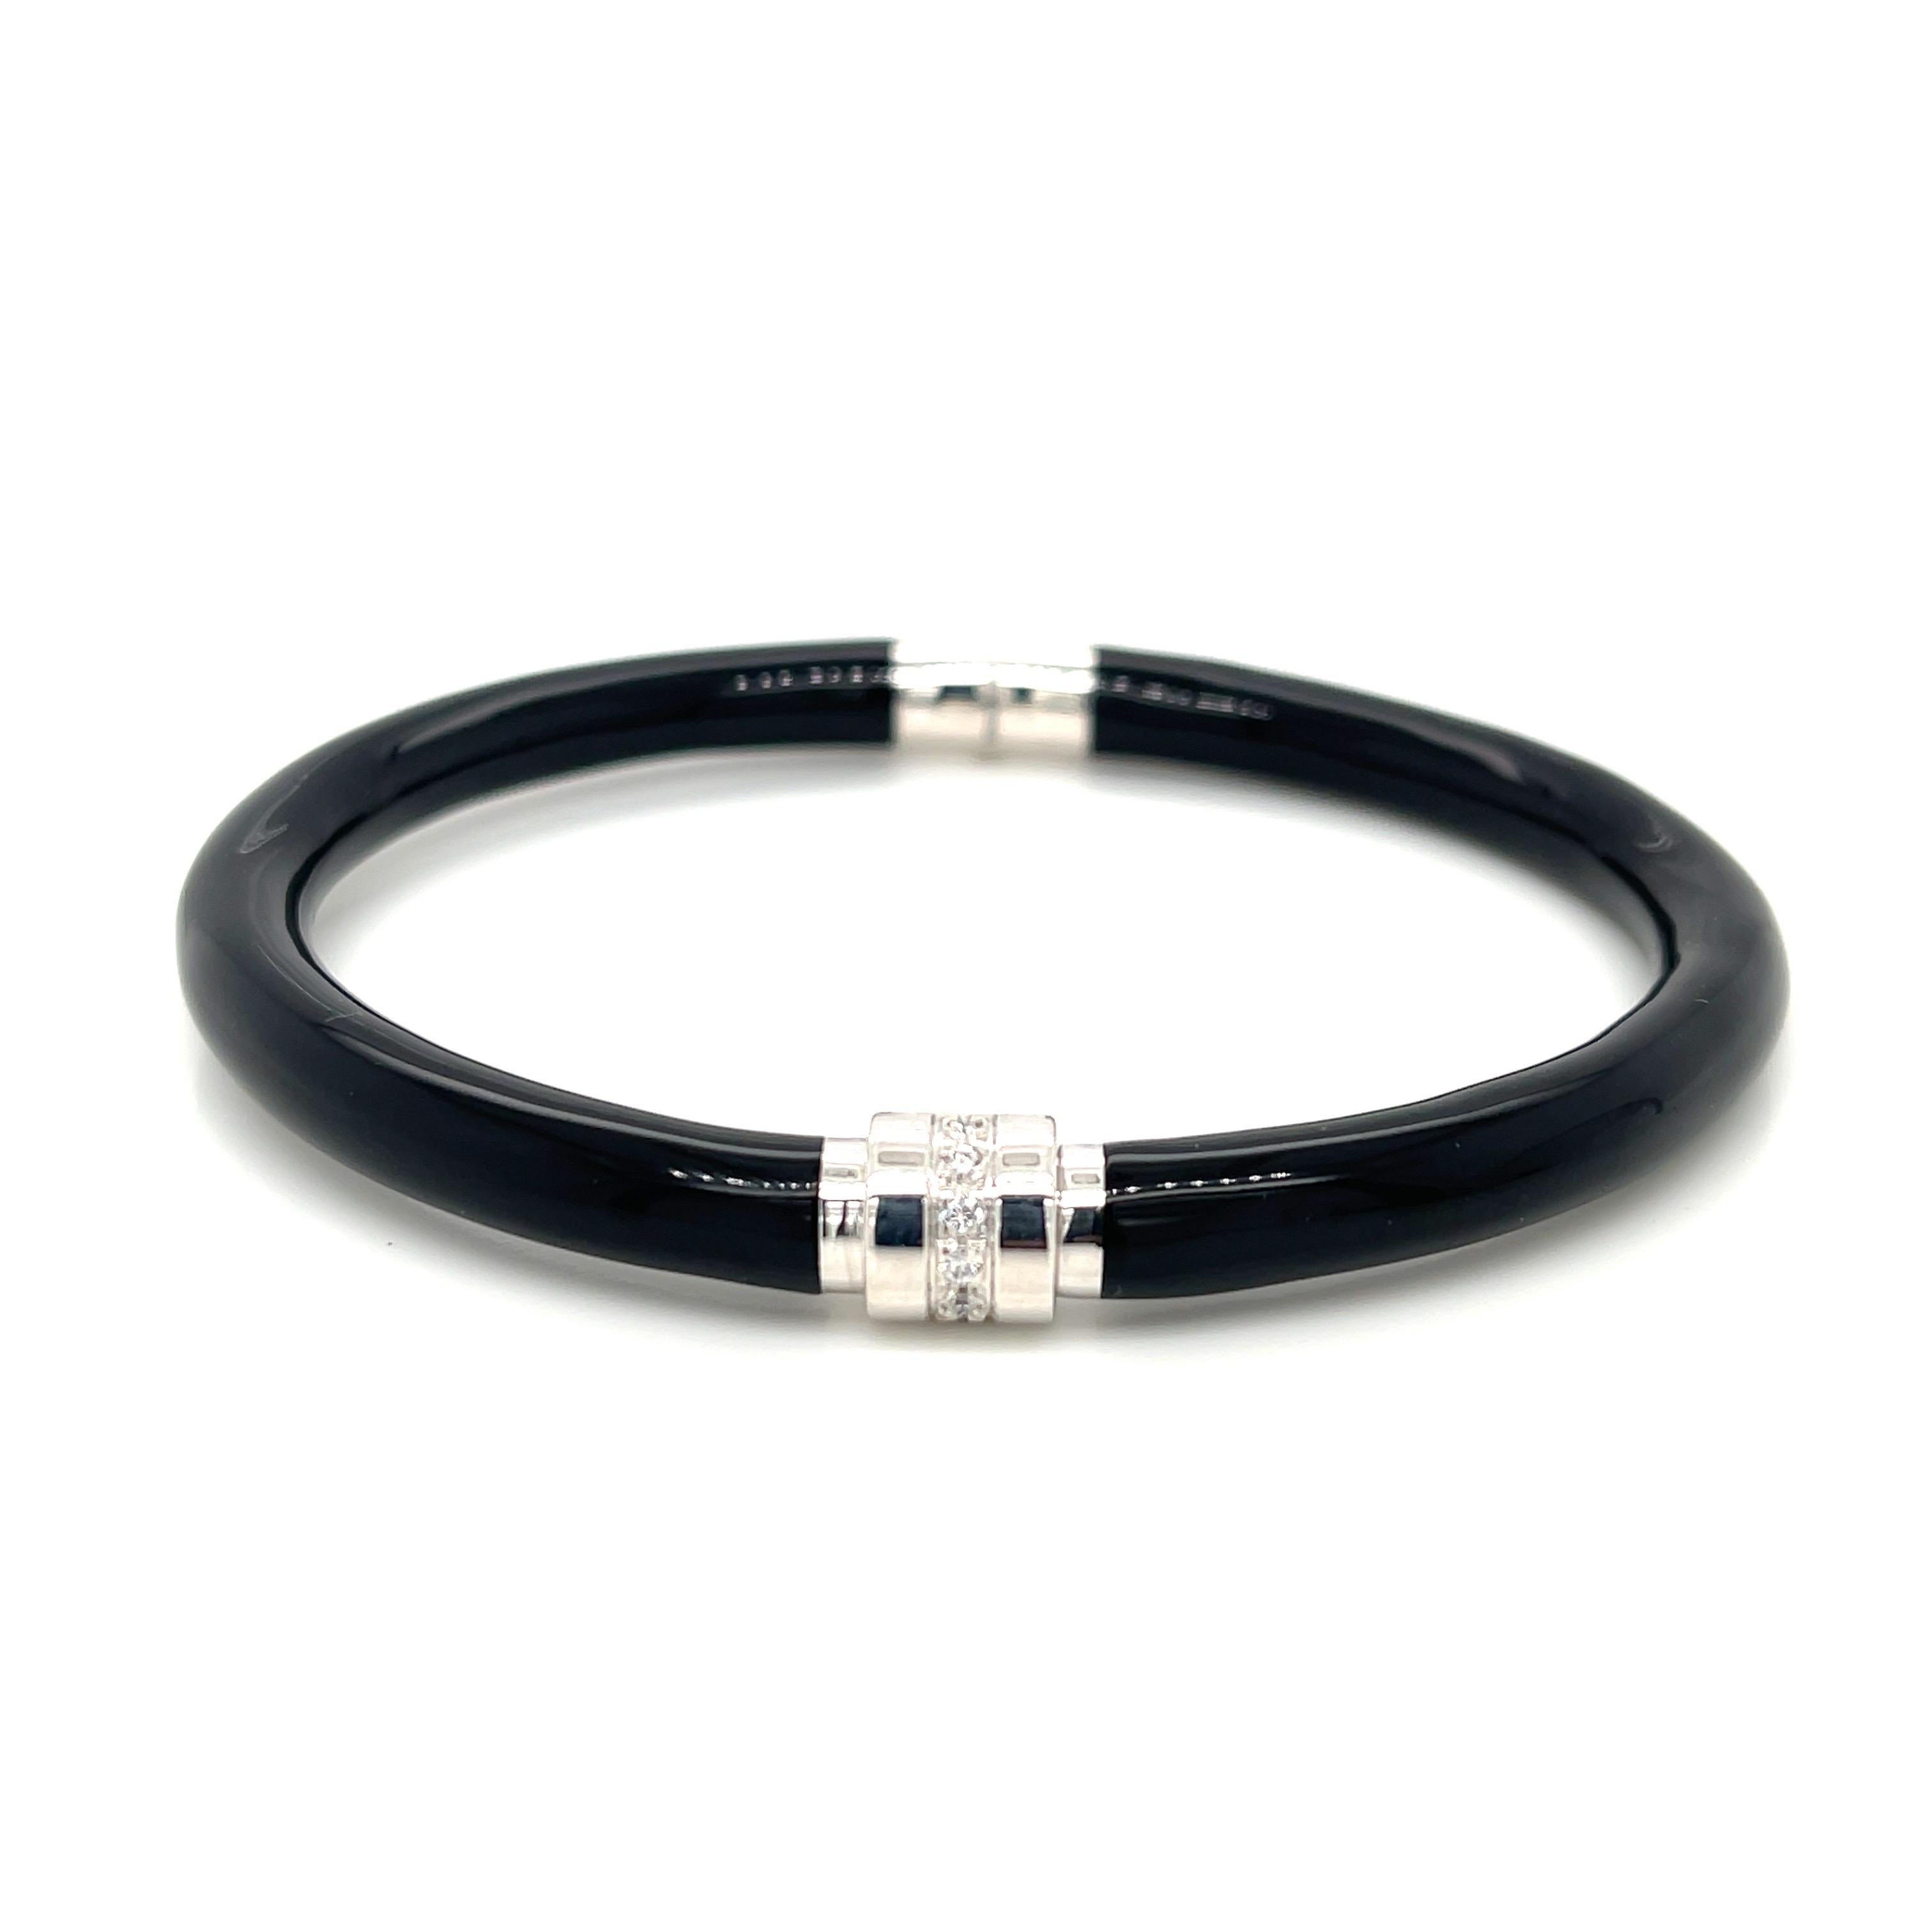 SOHO black enamel, sterling silver, and diamond (.08ctw) hinged bangle. Handcrafted in Italy. Inner circumference is 6.5 inches. 